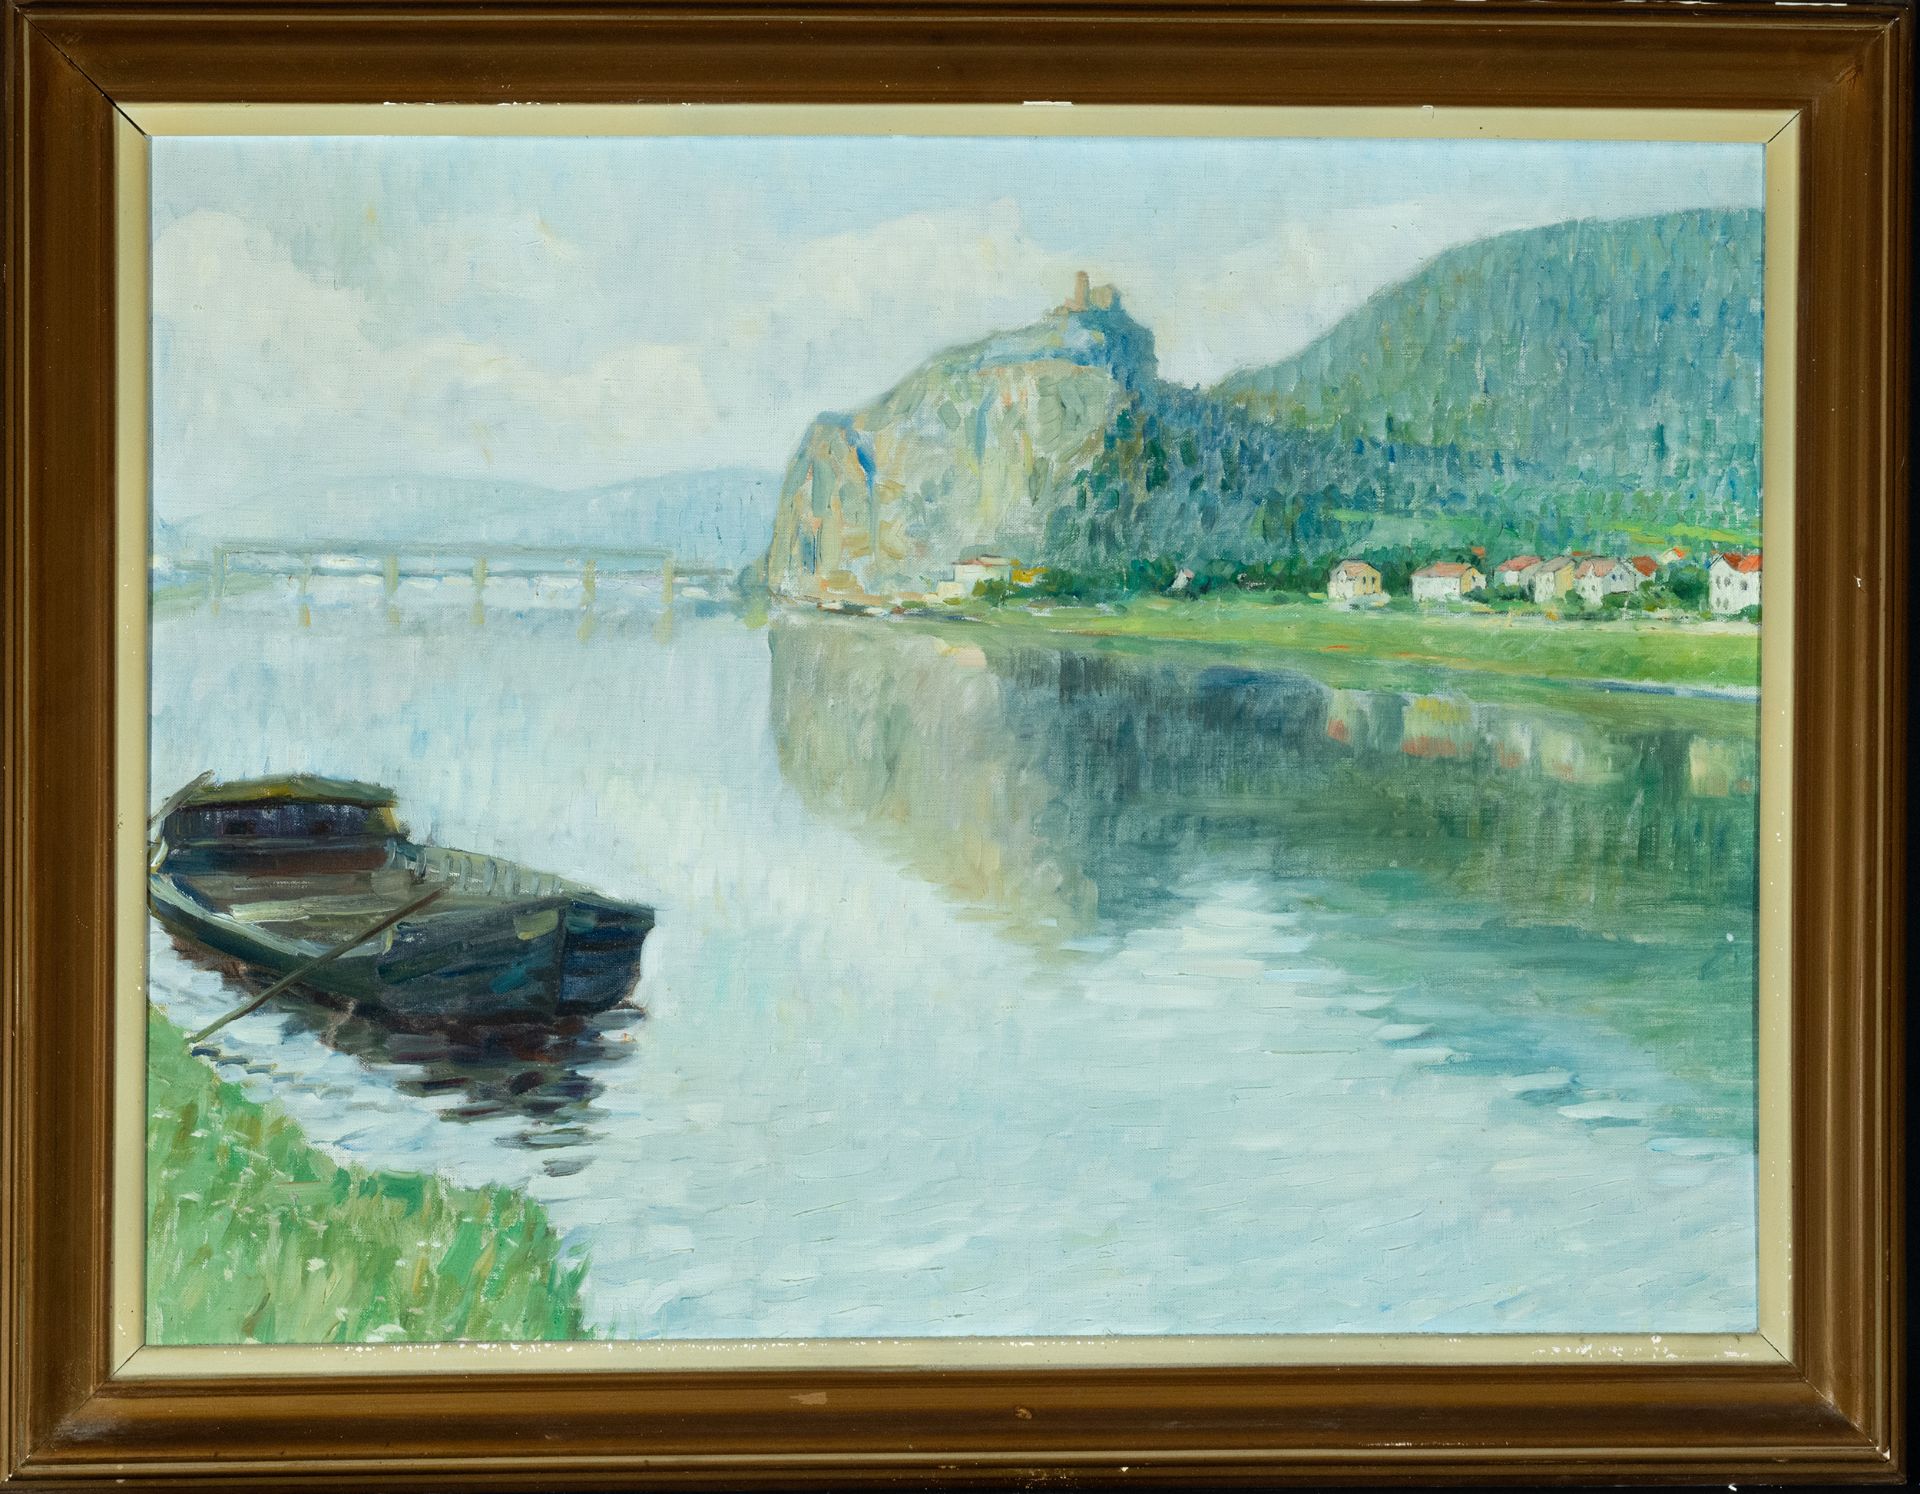 Fortress Over a River, signed T. Lietz, 20th century German school